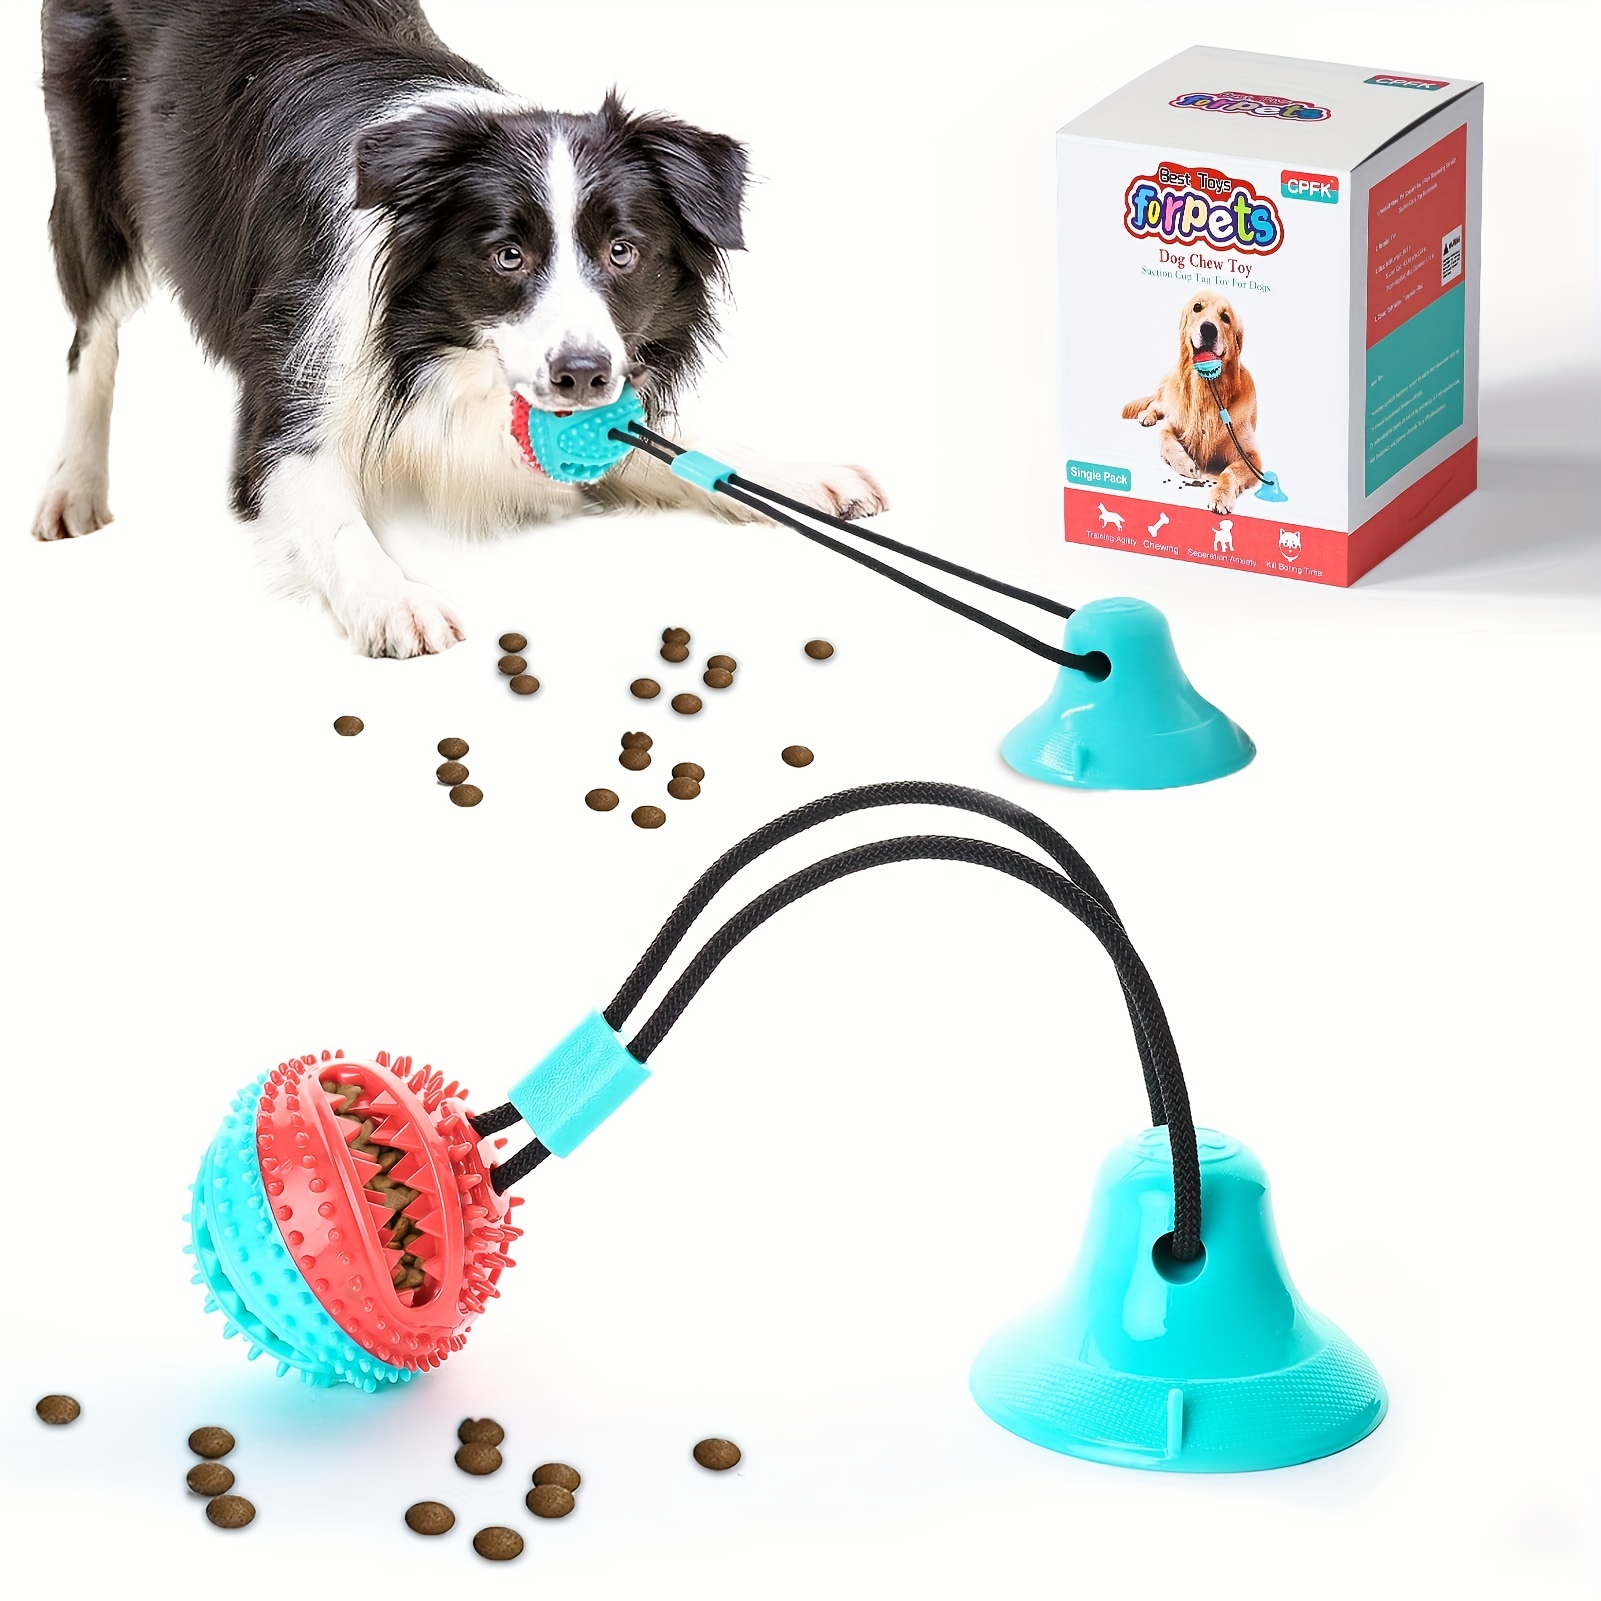 Suction Cup Dog Toy - Tug Toy for Dogs - Puppy Teething Chew Toys -  Improves Pet's Dental Health and IQ - Relieves Pet Anxiety - Strong Suction  for